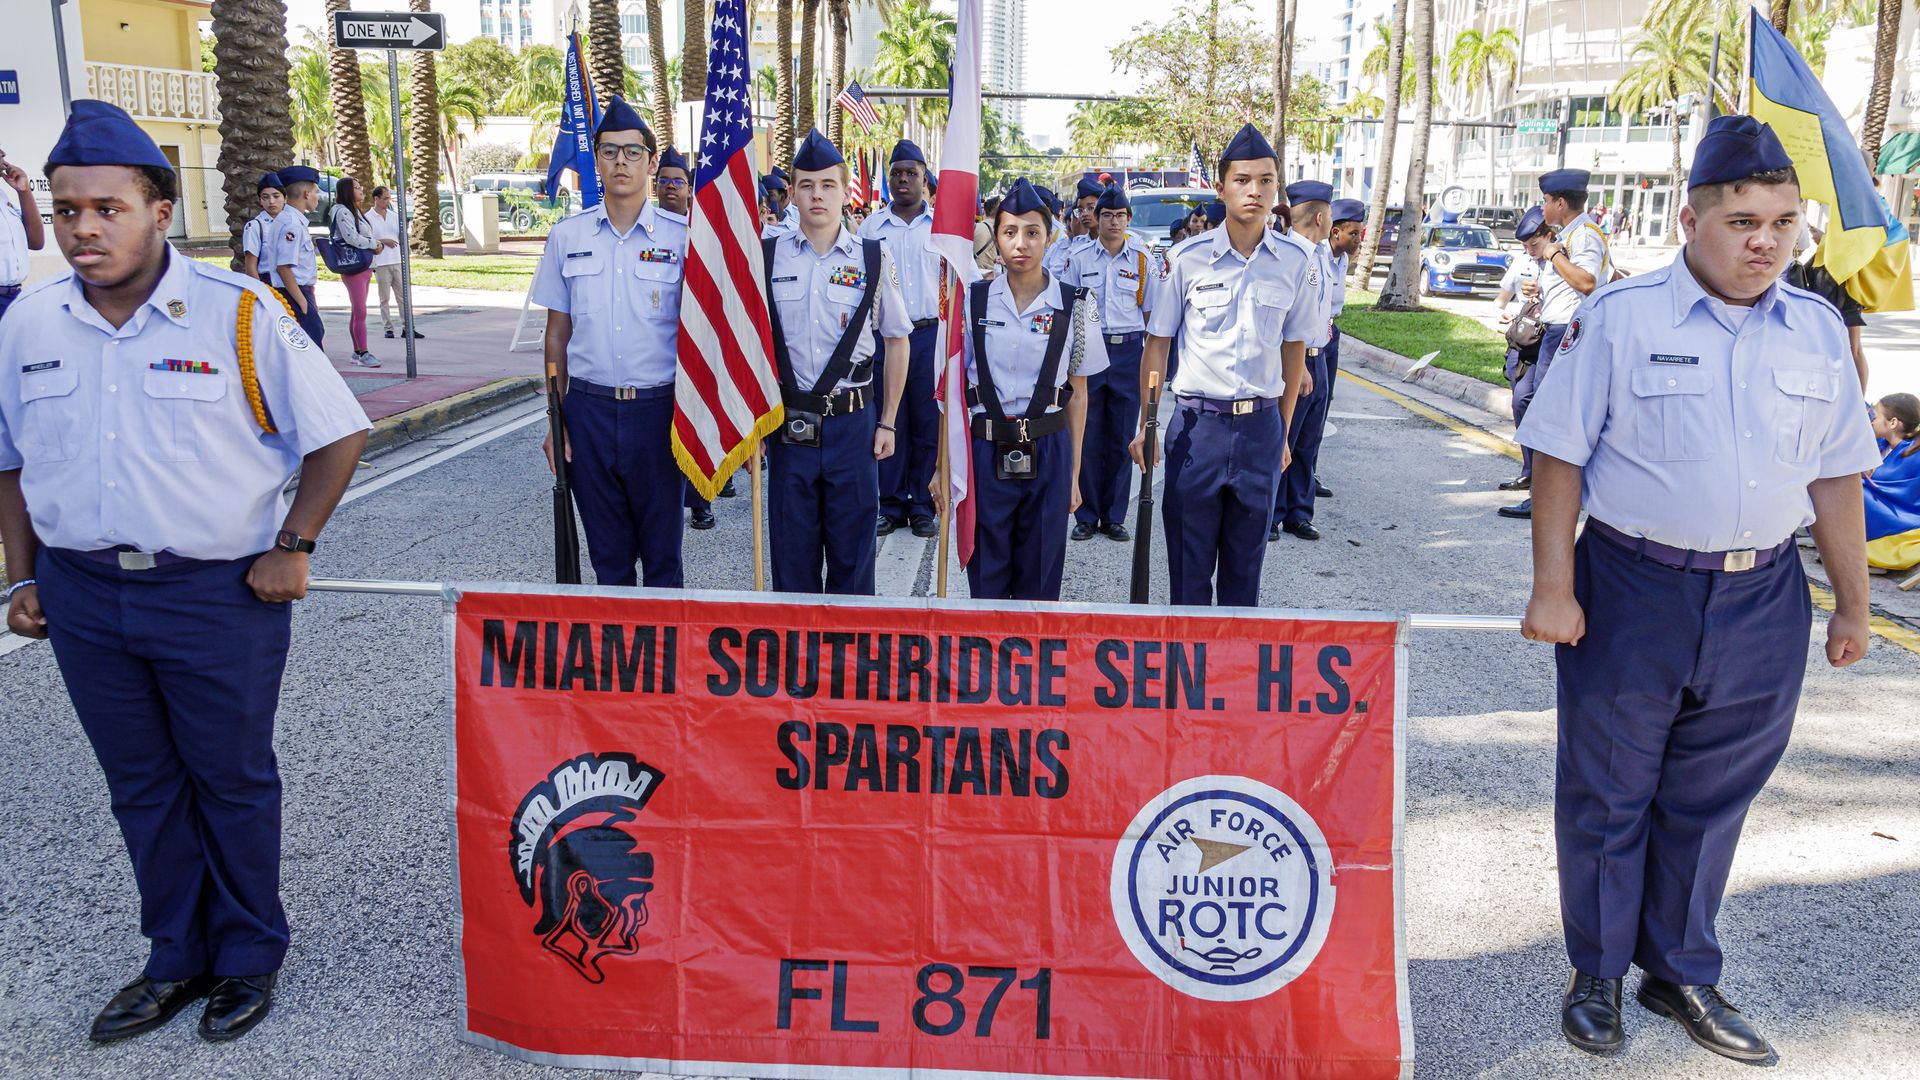  Southridge Senior High School Air Force ROTC cadets in Miami holding banner during Veterans Day Parade.